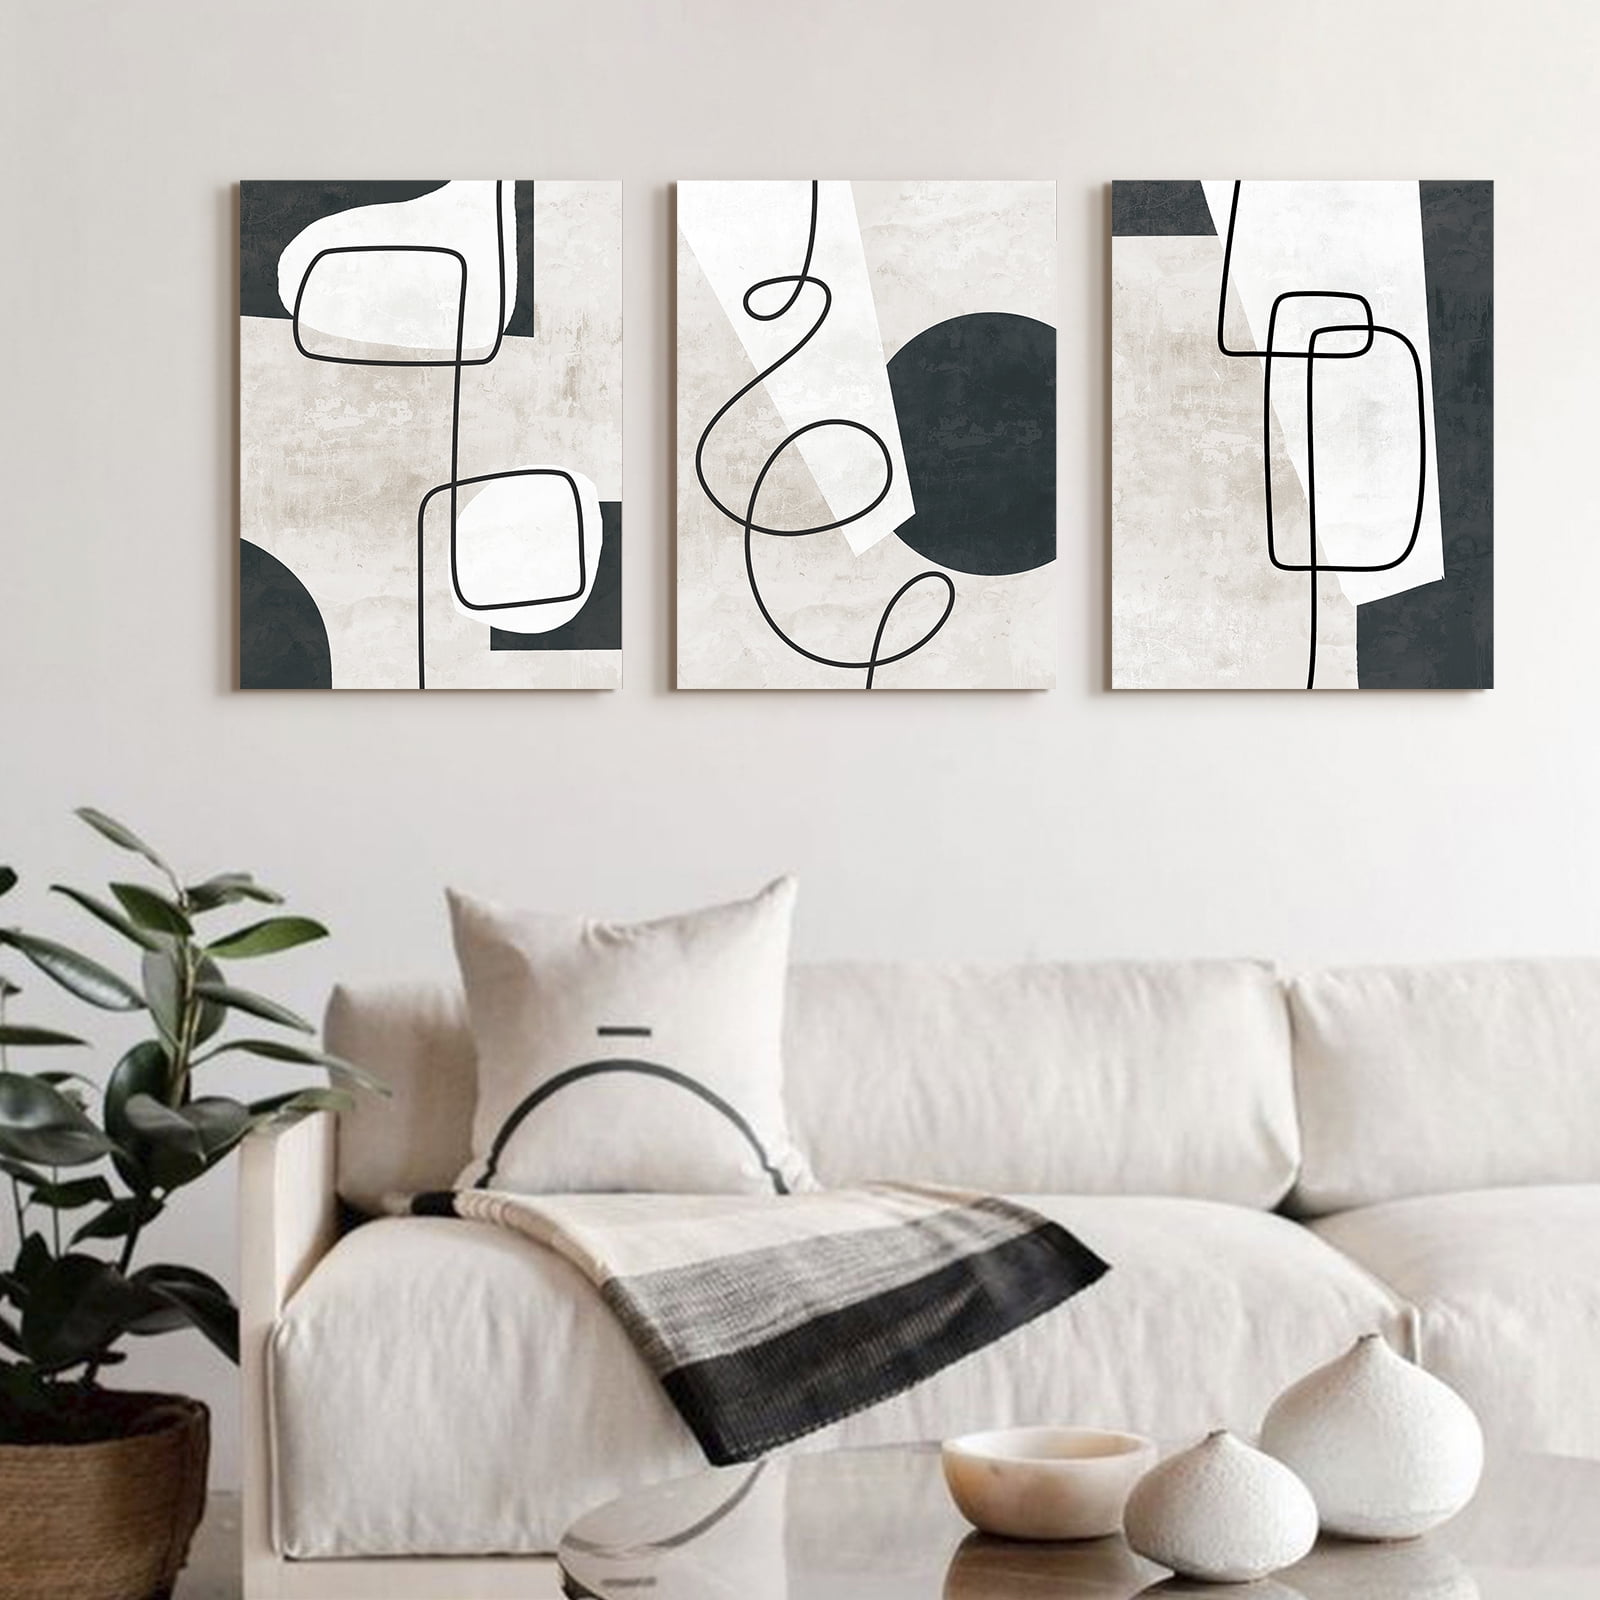 ArtbyHannah Pieces 16x24 inch Modern Abstract Wall Art Decor, Black and White  Canvas Wall Print Set with Minimalist Art Prints for Living Room 